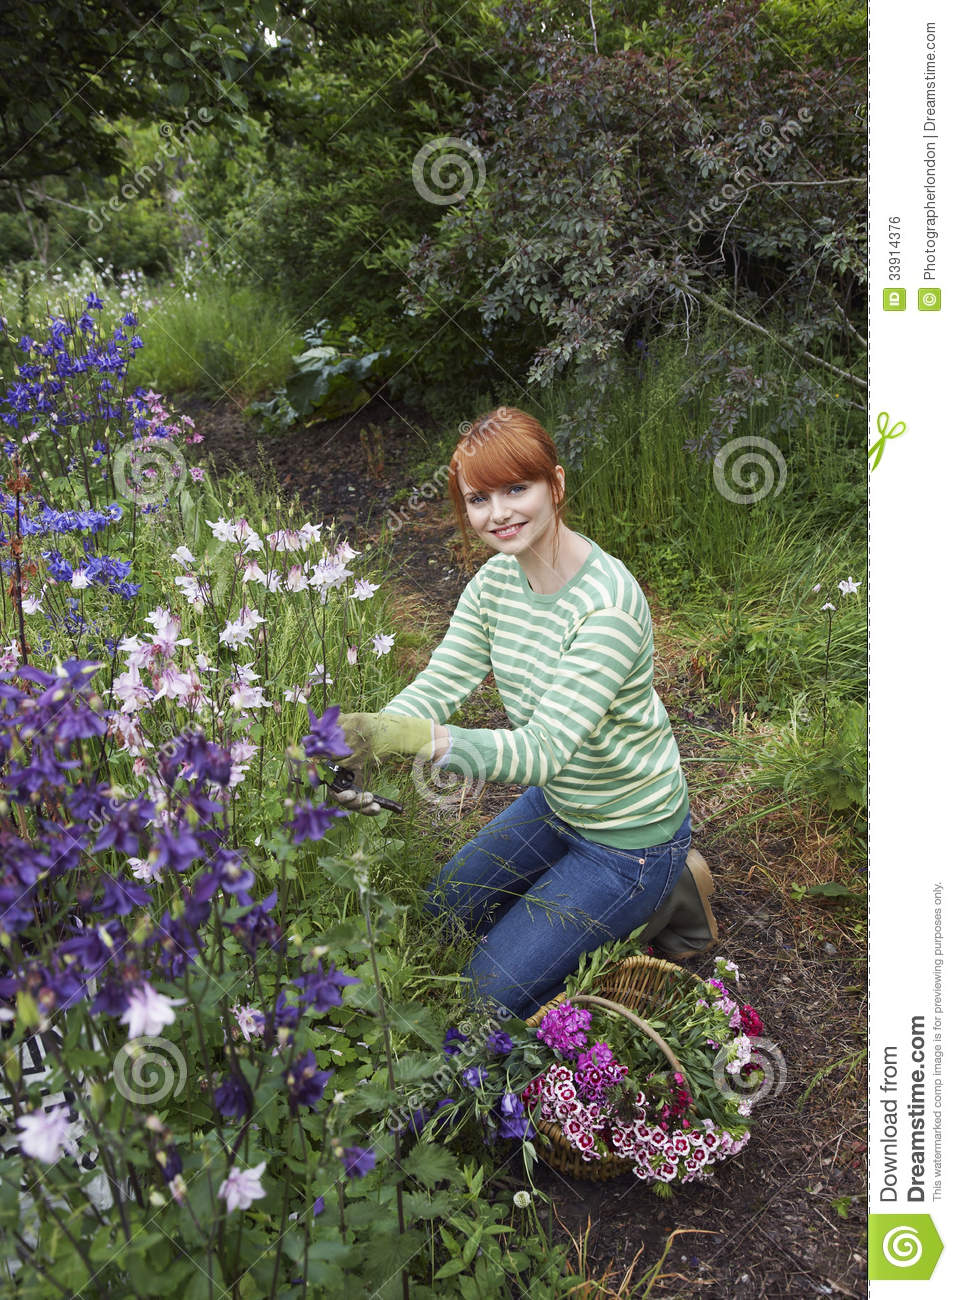 Woman Picking Flowers In Garden Royalty Free Stock Image   Image